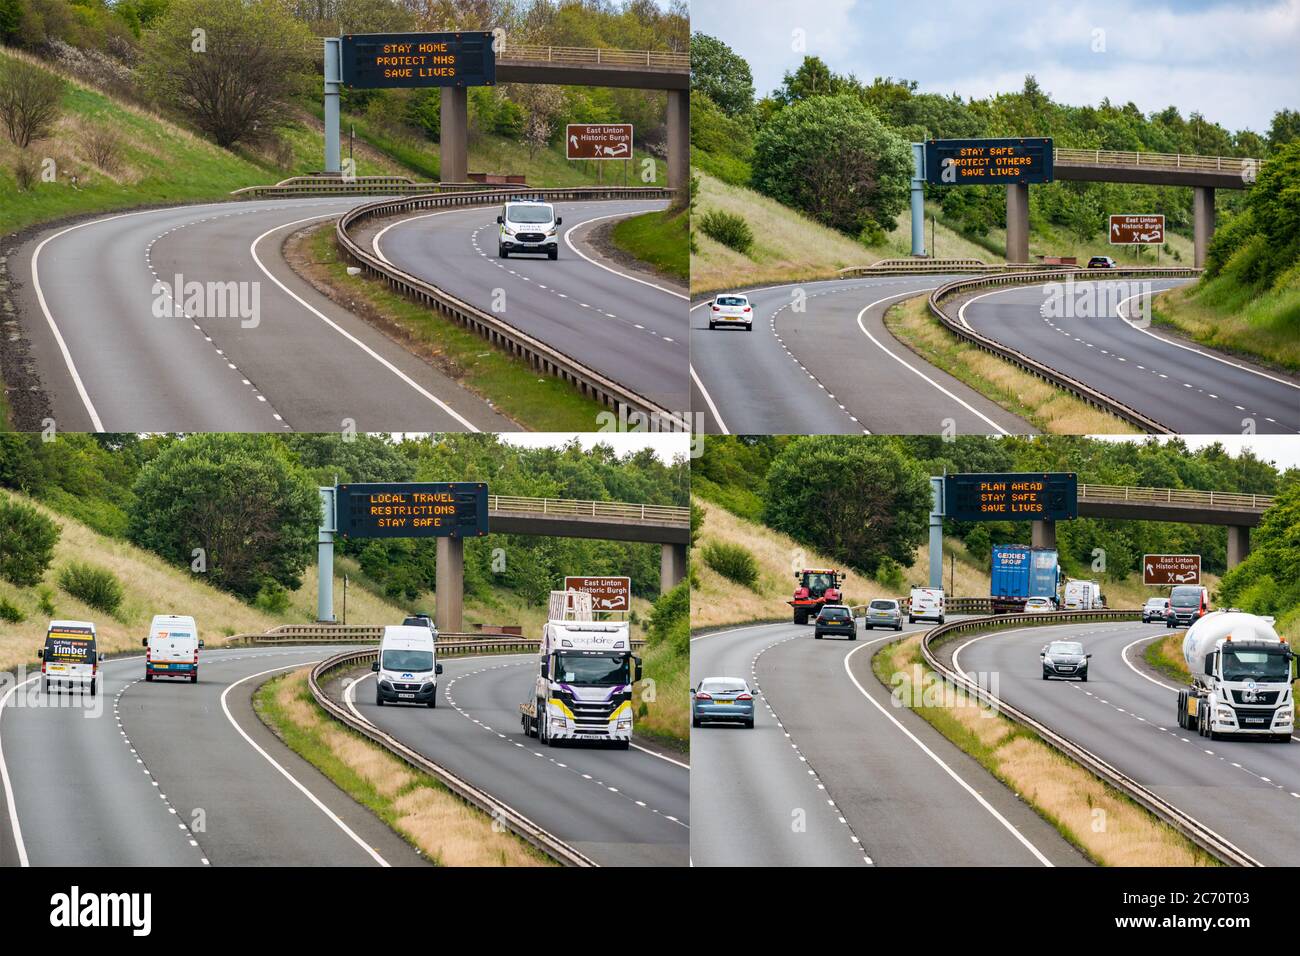 East Lothian, Scotland, United Kingdom, 13th July 2020. A composite of the Scottish Government's Covid-19 travel advice on an overhead gantry during the Coronavirus pandemic on the A1 using slogans. The latest and 4th message (13/7/2020) as Scotland prepares to enter Phase 3 is: 'Plan Ahead, Stay Safe, Save Lives'. Previous versions were 17/4/2020: 'Stay Home, Protect NHS, Save Lives'; 21/6/2020: 'Stay Safe, Protect Others, Save Lives' and 7/7/2020: 'Local Travel Restrictions, Stay Safe' when part of the SW of Scotland was locked down again due to an upsurge in cases Stock Photo